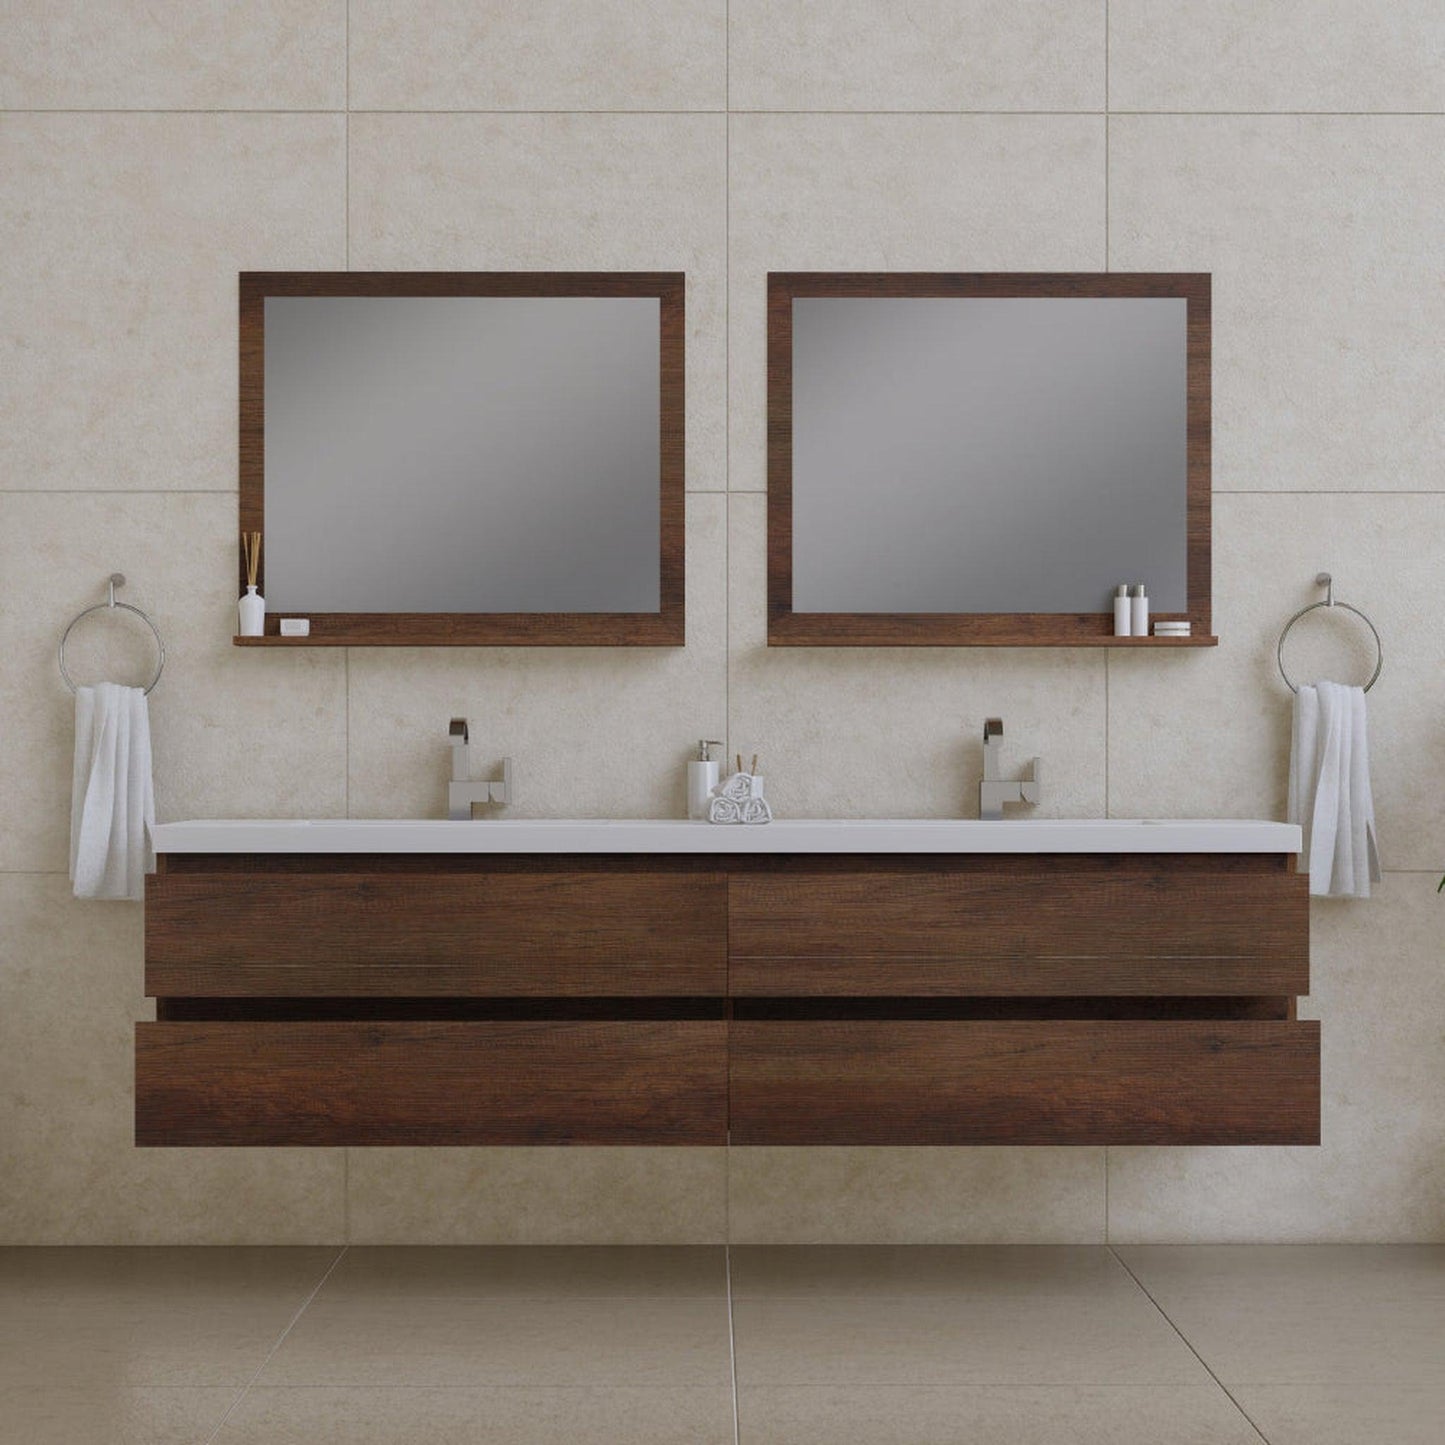 Alya Bath Paterno 84" Double Rosewood Modern Wall Mounted Bathroom Vanity With Acrylic Top and Integrated Sink